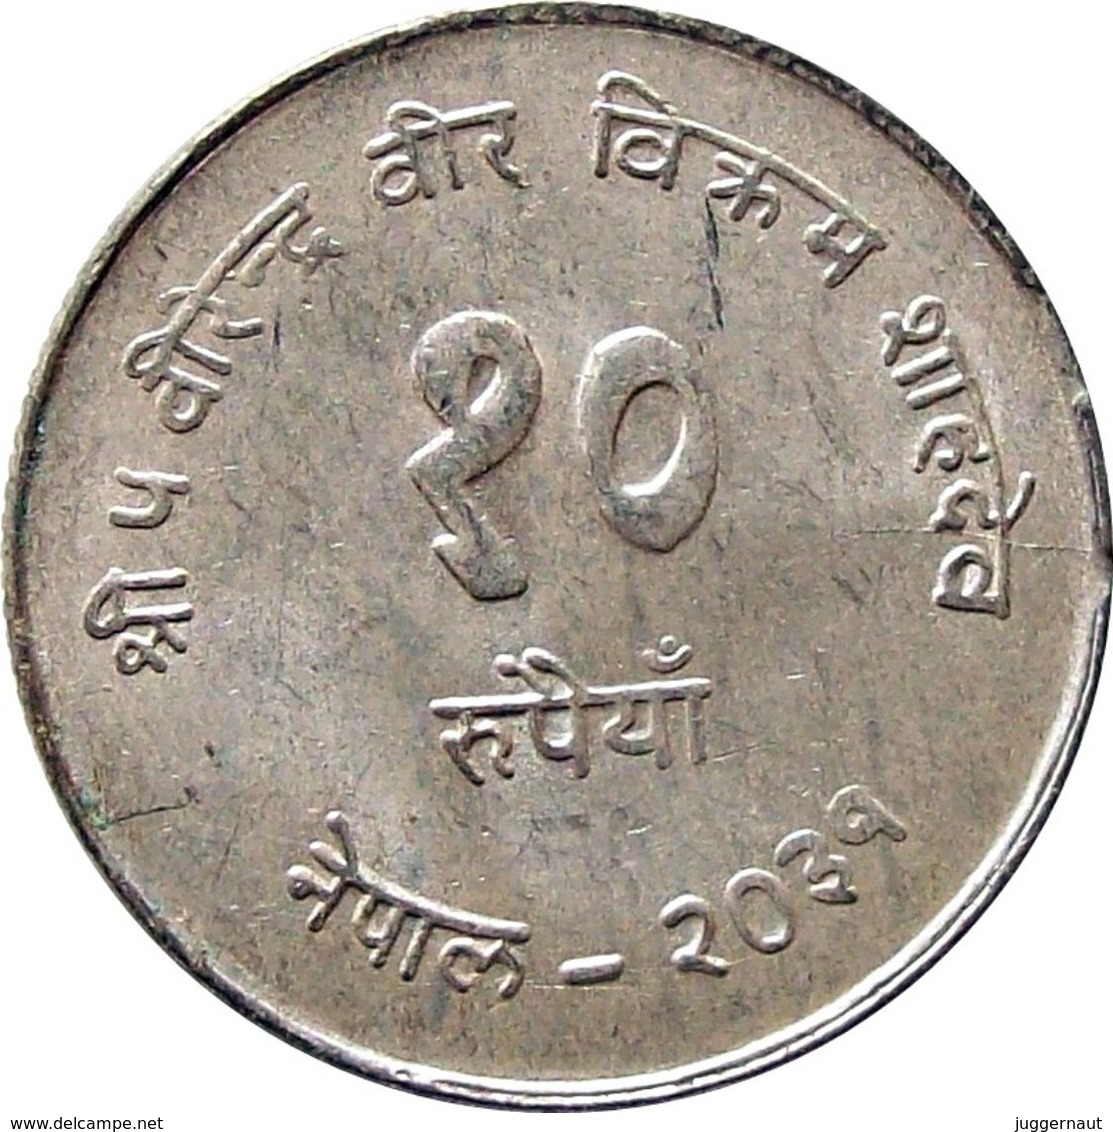 BALANCED DIET/FAMILY PLANNING CAMPAIGN SILVER COMMEMORATIVE COIN NEPAL 1974 KM-835 UNCIRCULATED UNC - Nepal